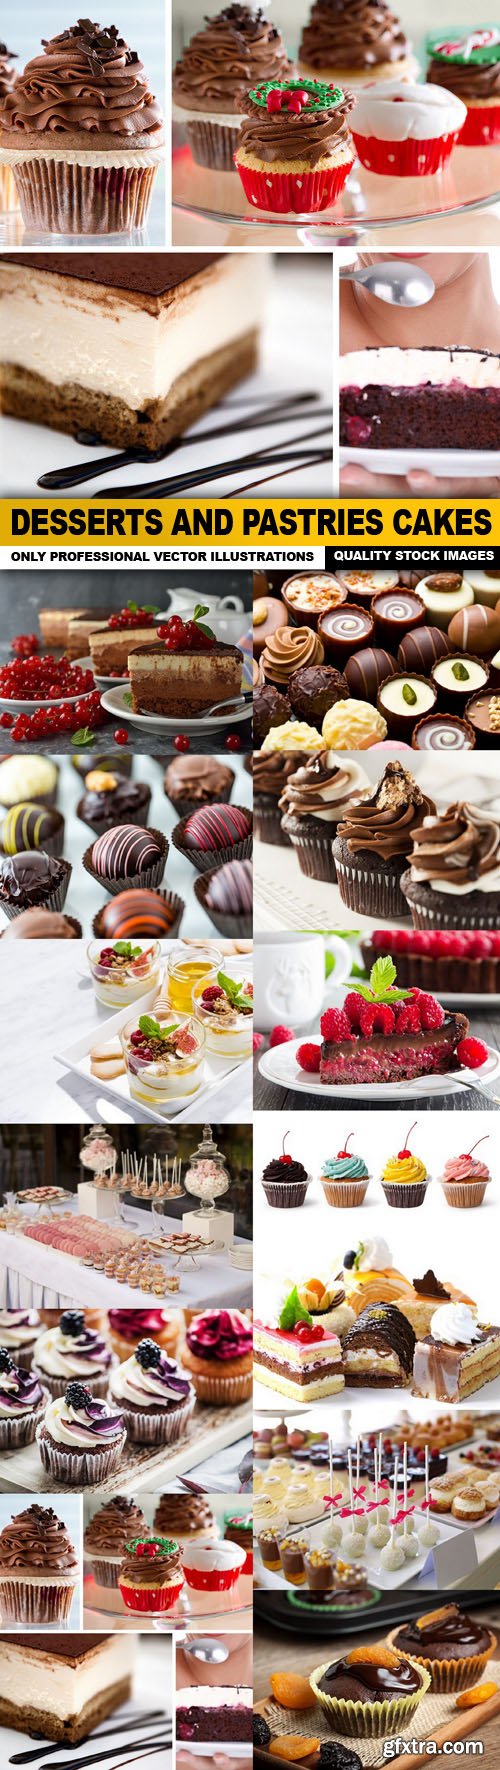 Desserts And Pastries Cakes - 13 HQ Images